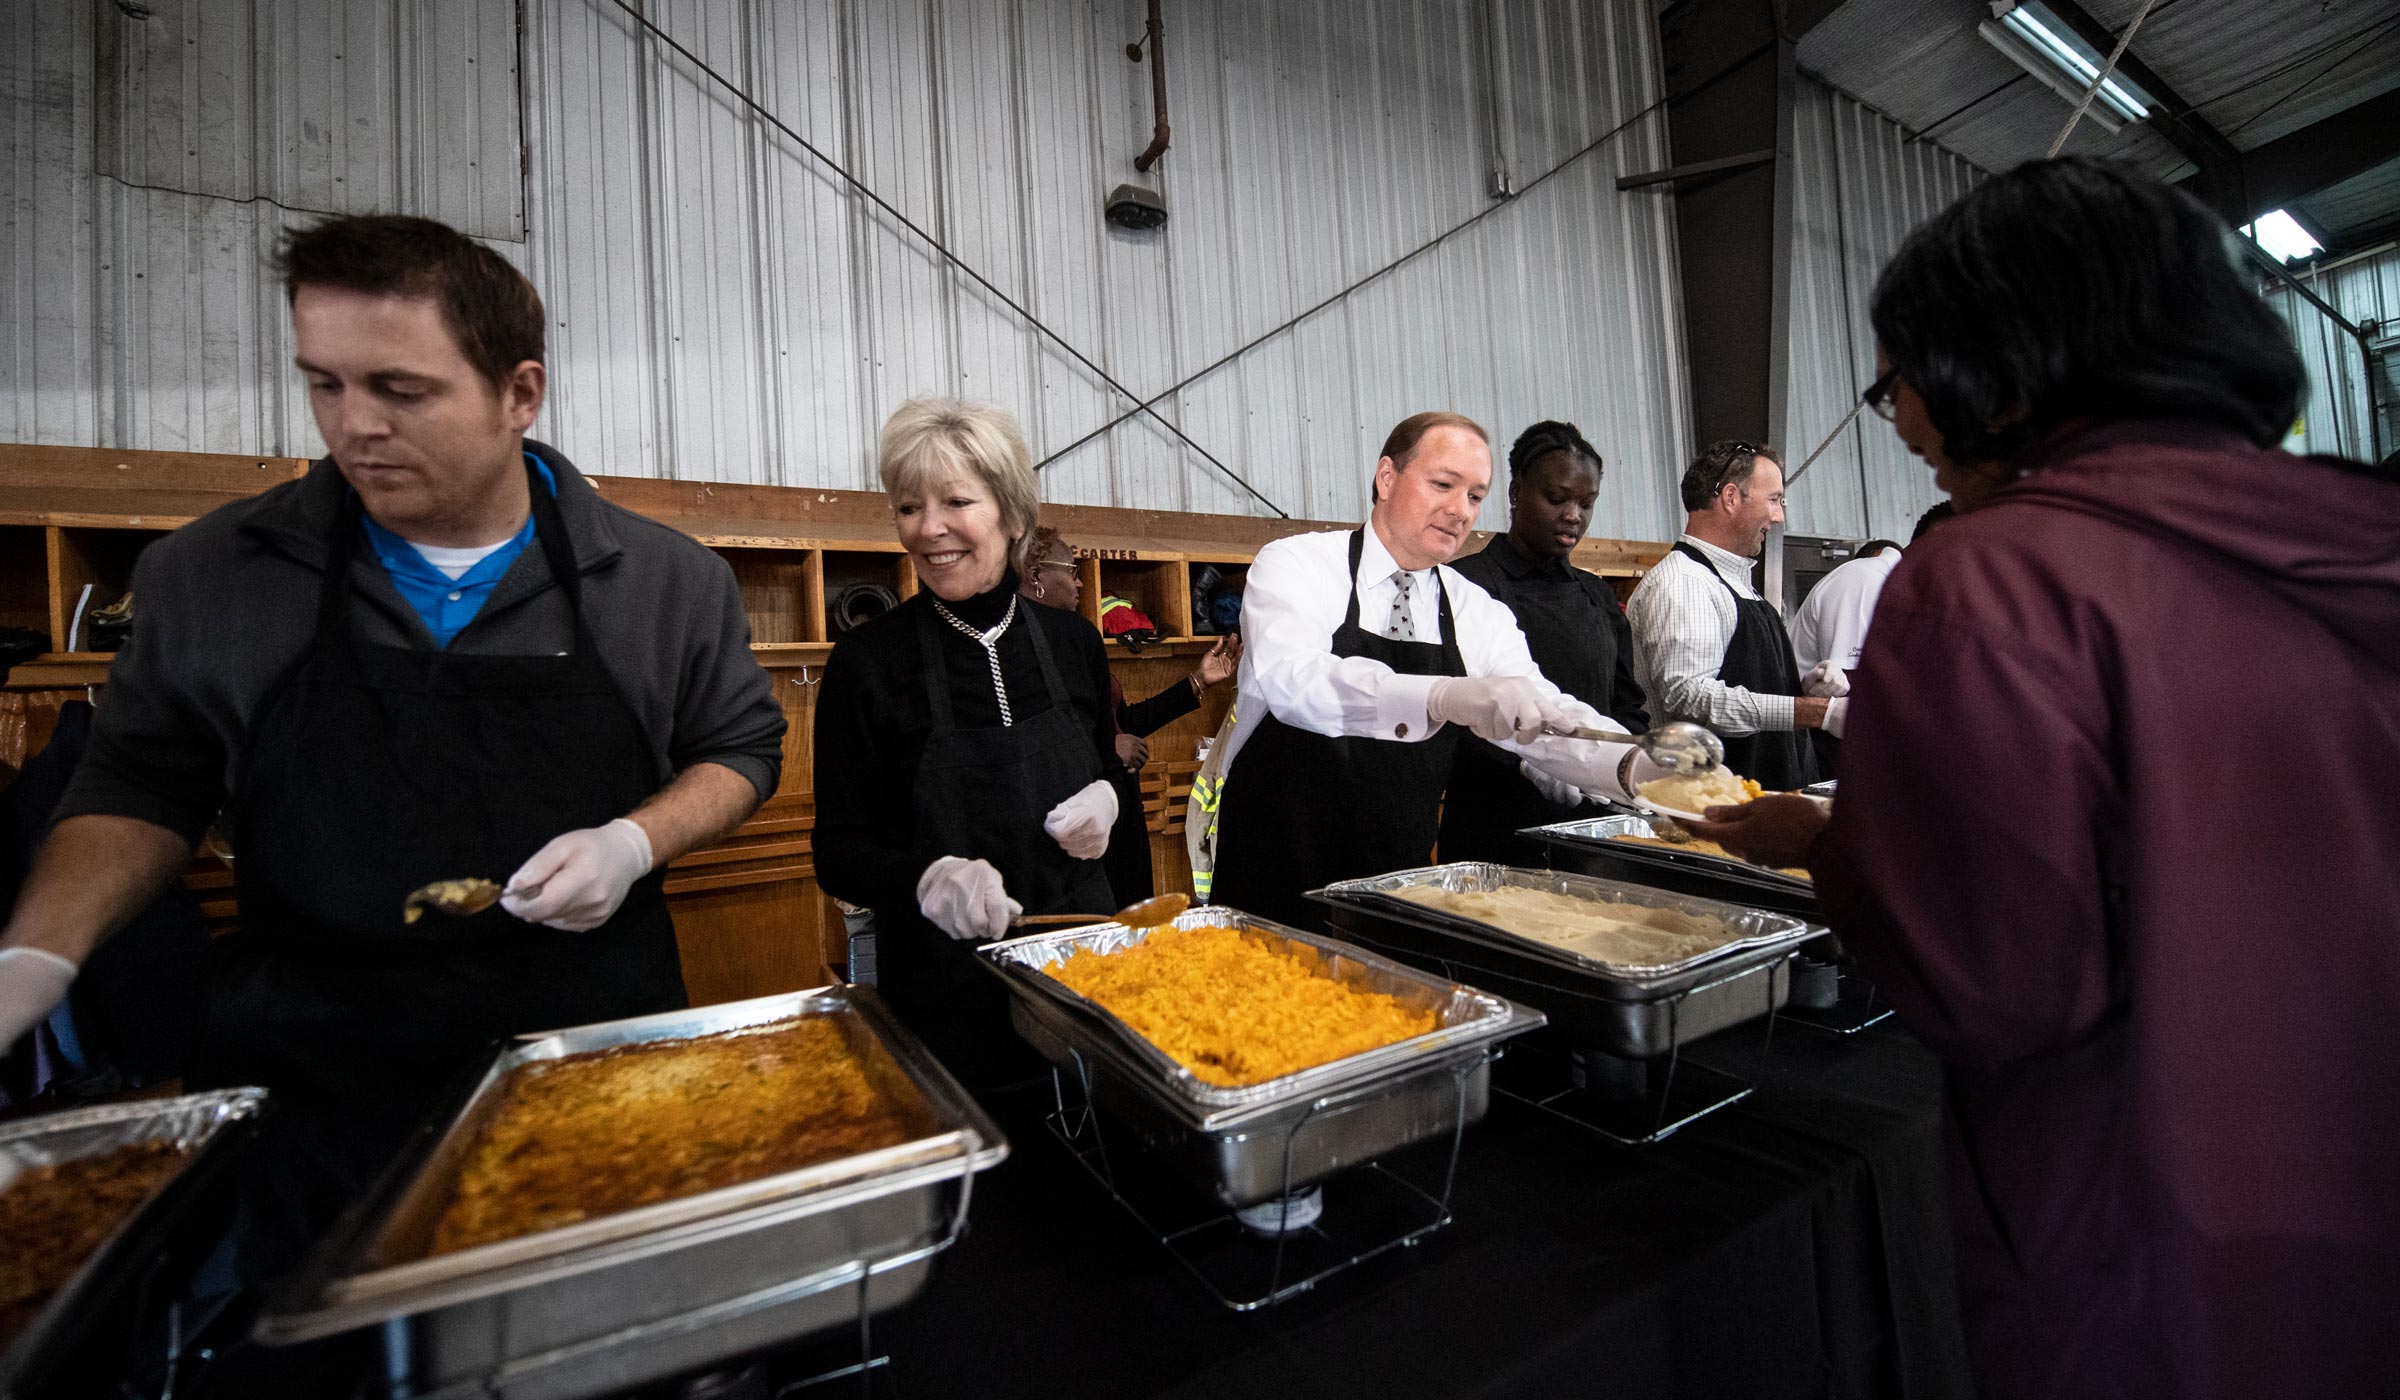 MSU President Dr. Mark Keenum serves Thanksgiving lunch to firefighters and other city officials at Fire Station one.